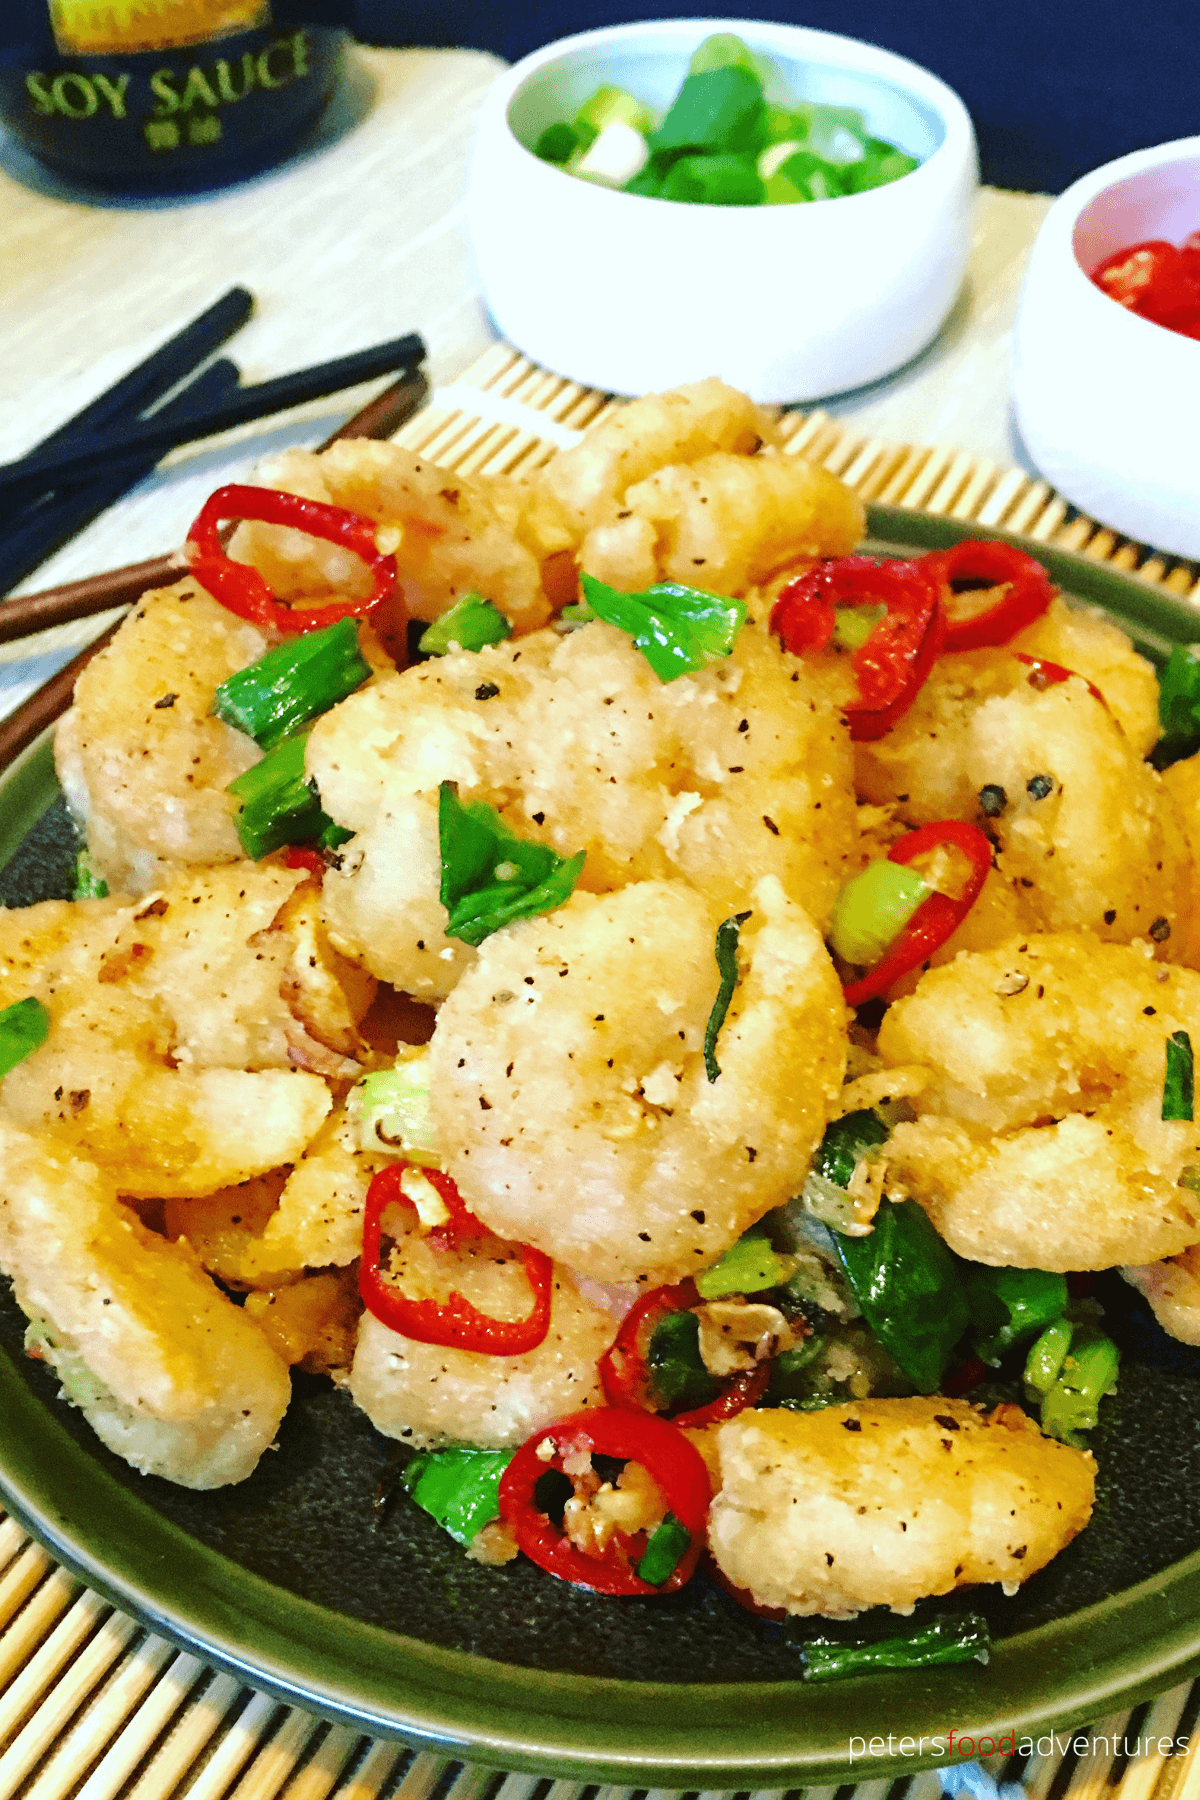 Chinese Salt and Pepper Shrimp is a quick, crunchy and delicious appetizer! An Asian style Popcorn Shrimp that's easy to eat, because there is no shell! Salt and Pepper Shrimp No Shell recipe.